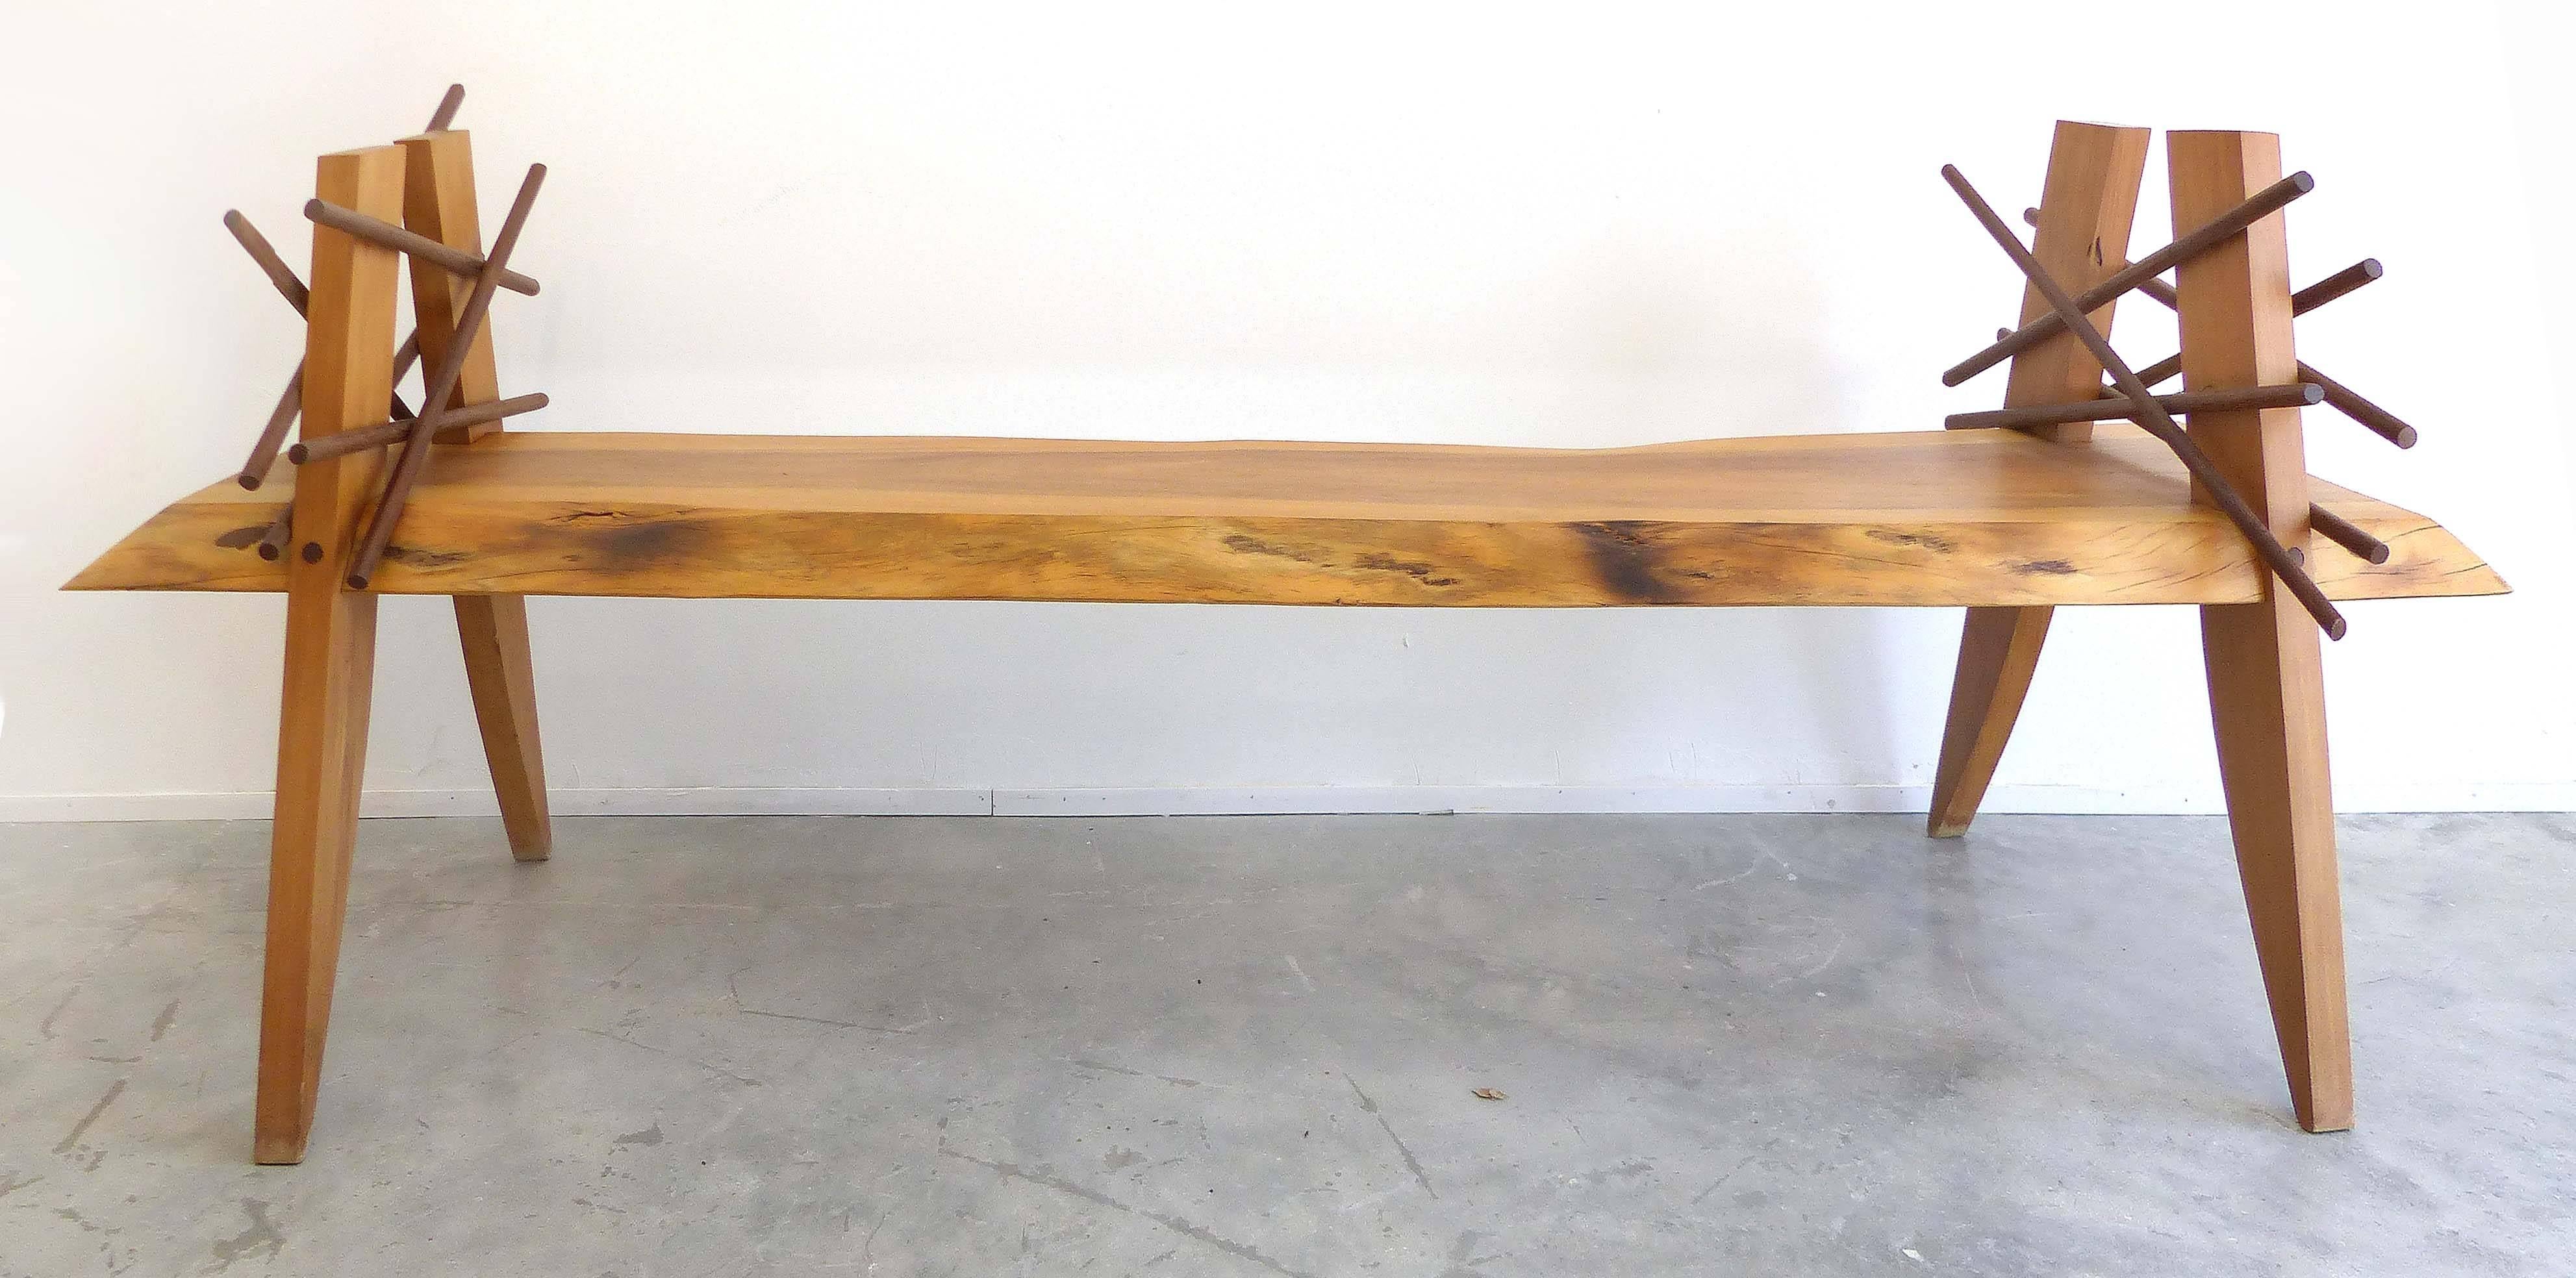 A Garapa wood bench inspired by the Xingu tribe and designed by Brazilian artist Valeria Totti. The artist has come to an agreement with the Brazilian government to aid in the replanting and reforestation of the Amazon jungle. Totti salvages fallen